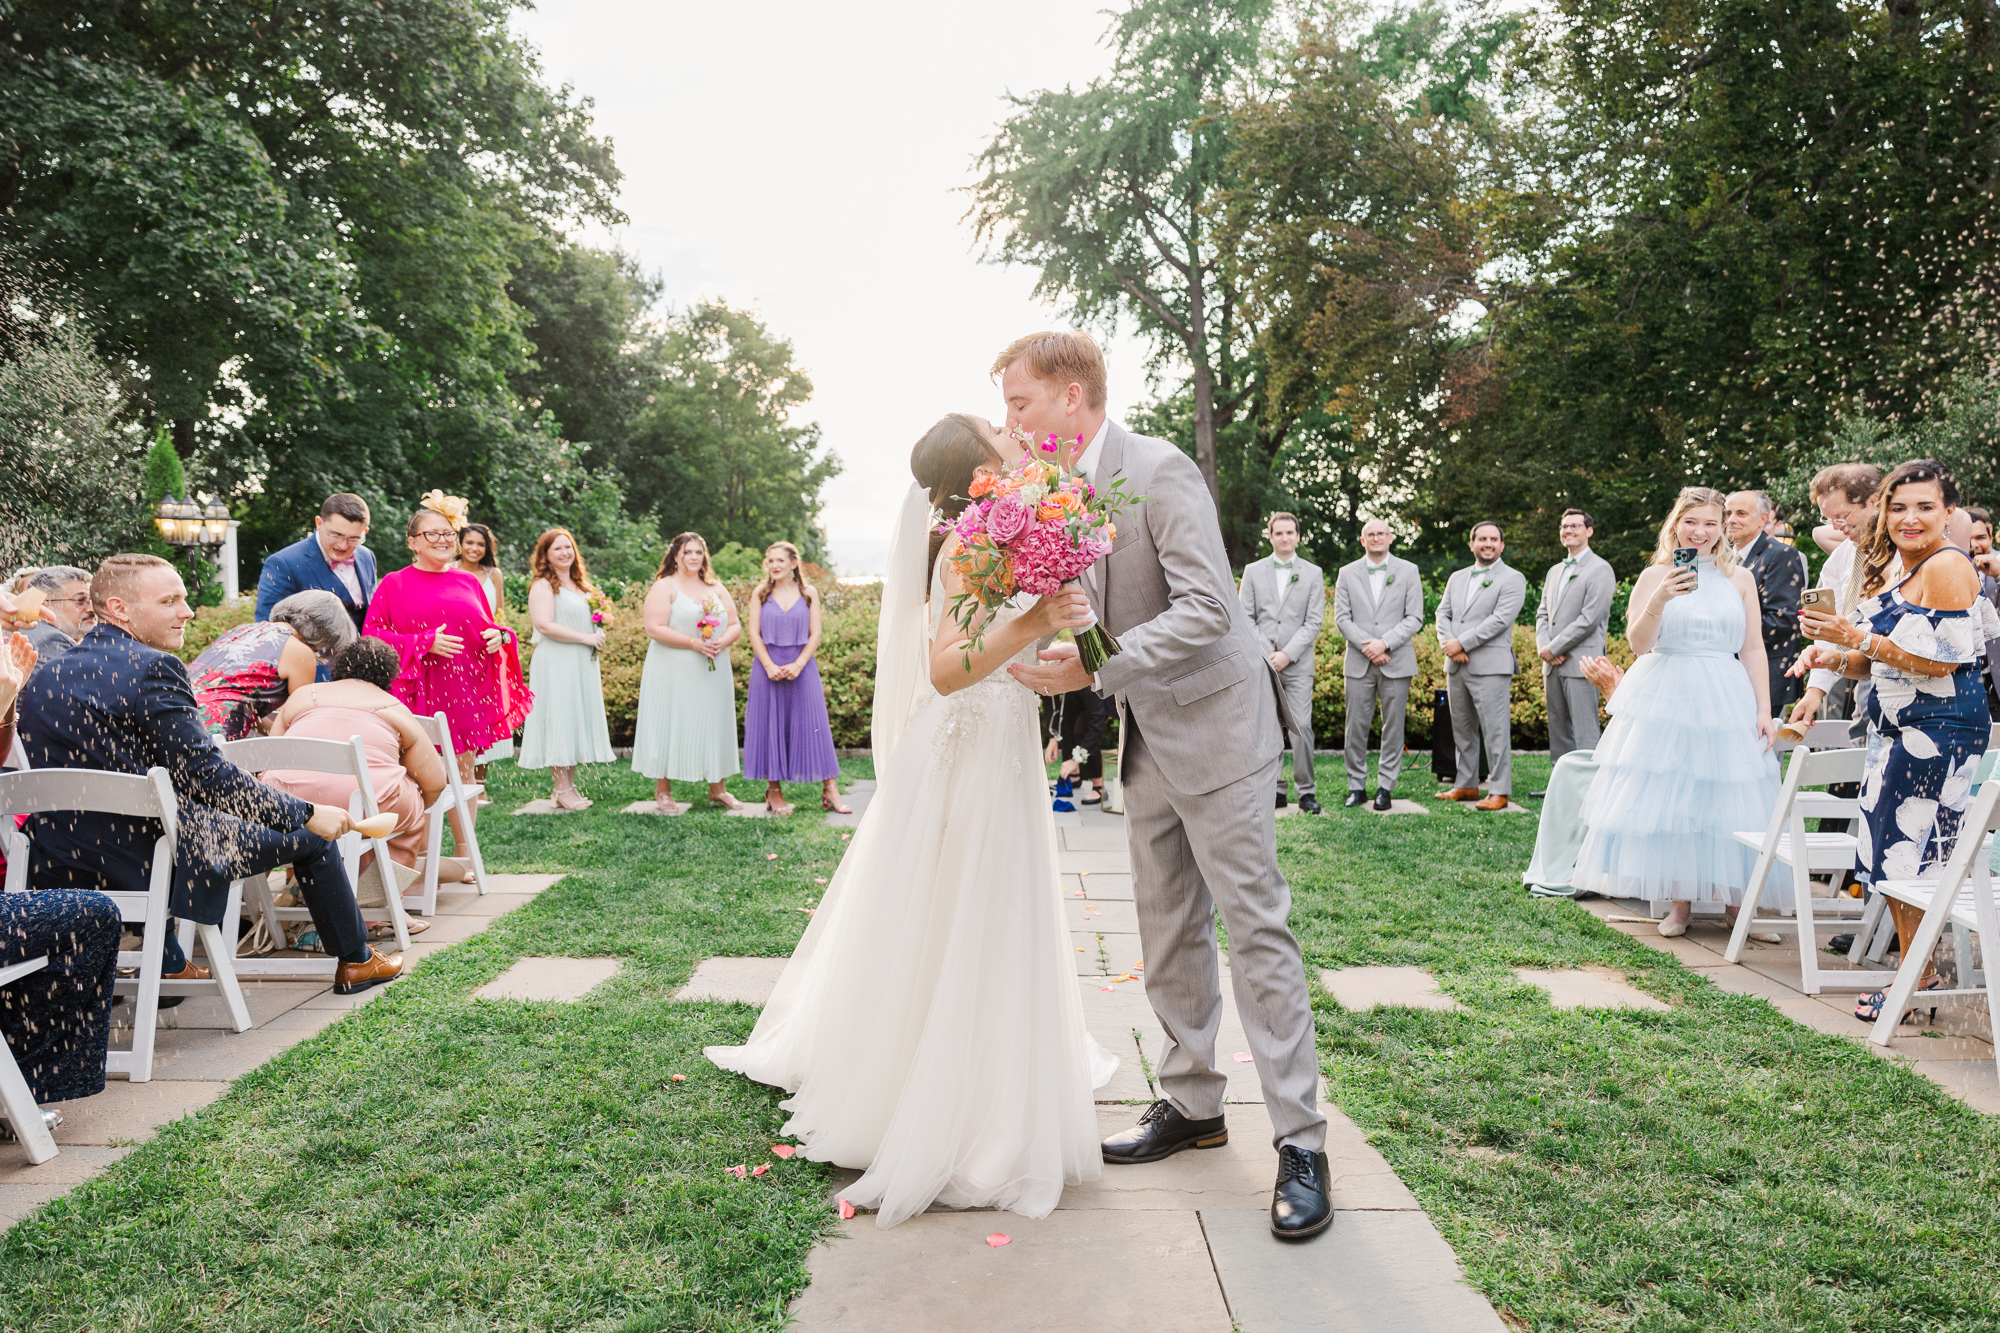 Cute Wedding at Briarcliff Manor in Summertime